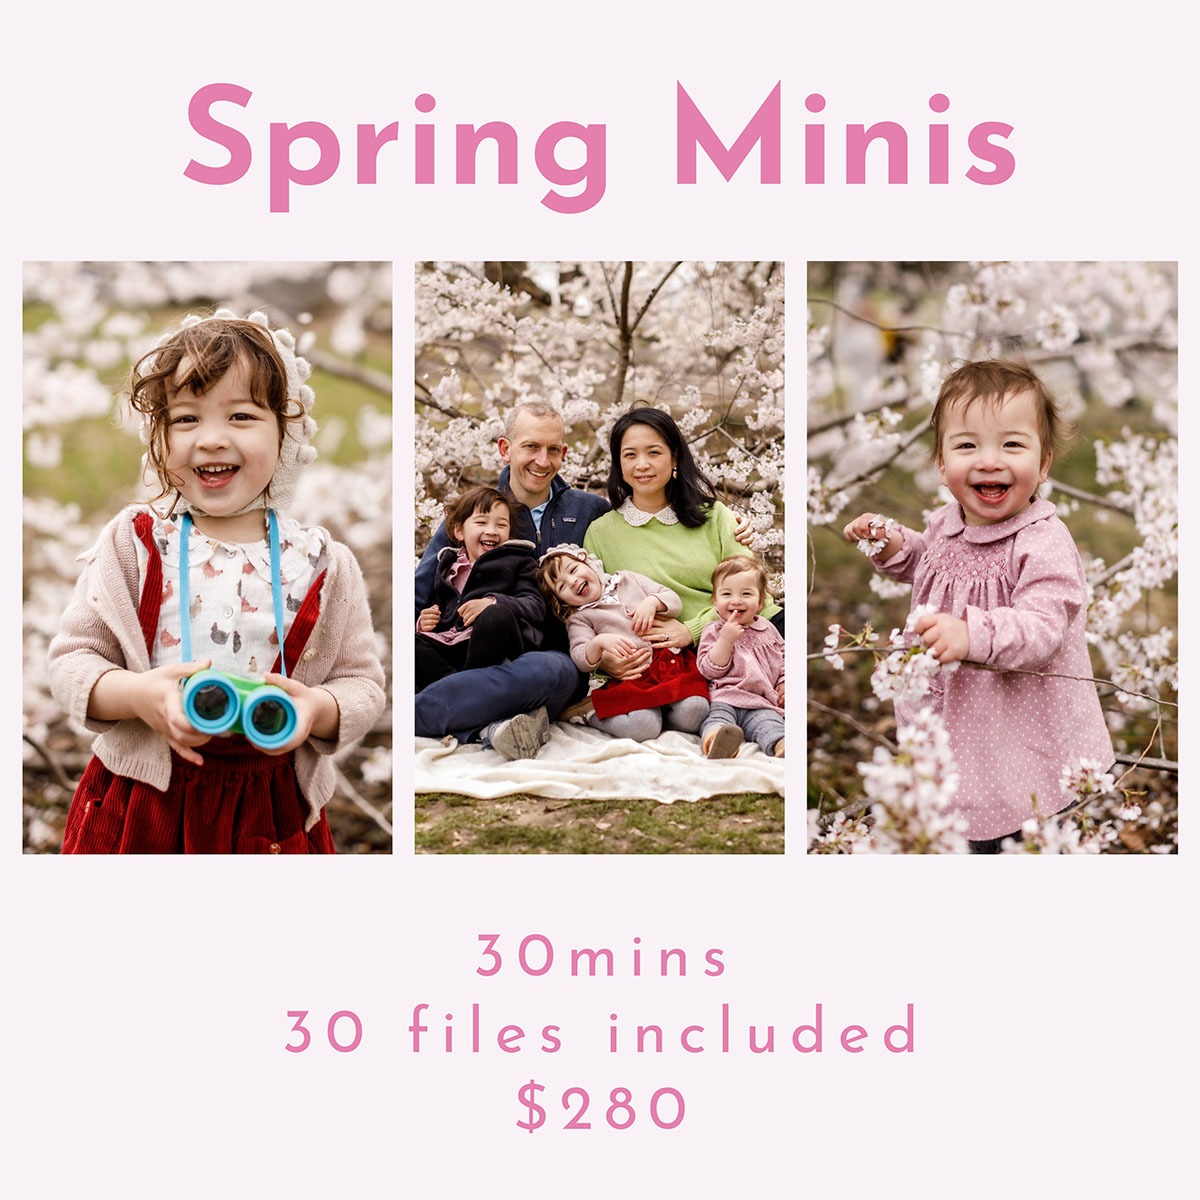 flyer for spring minis with three photographies of toddlers and parents